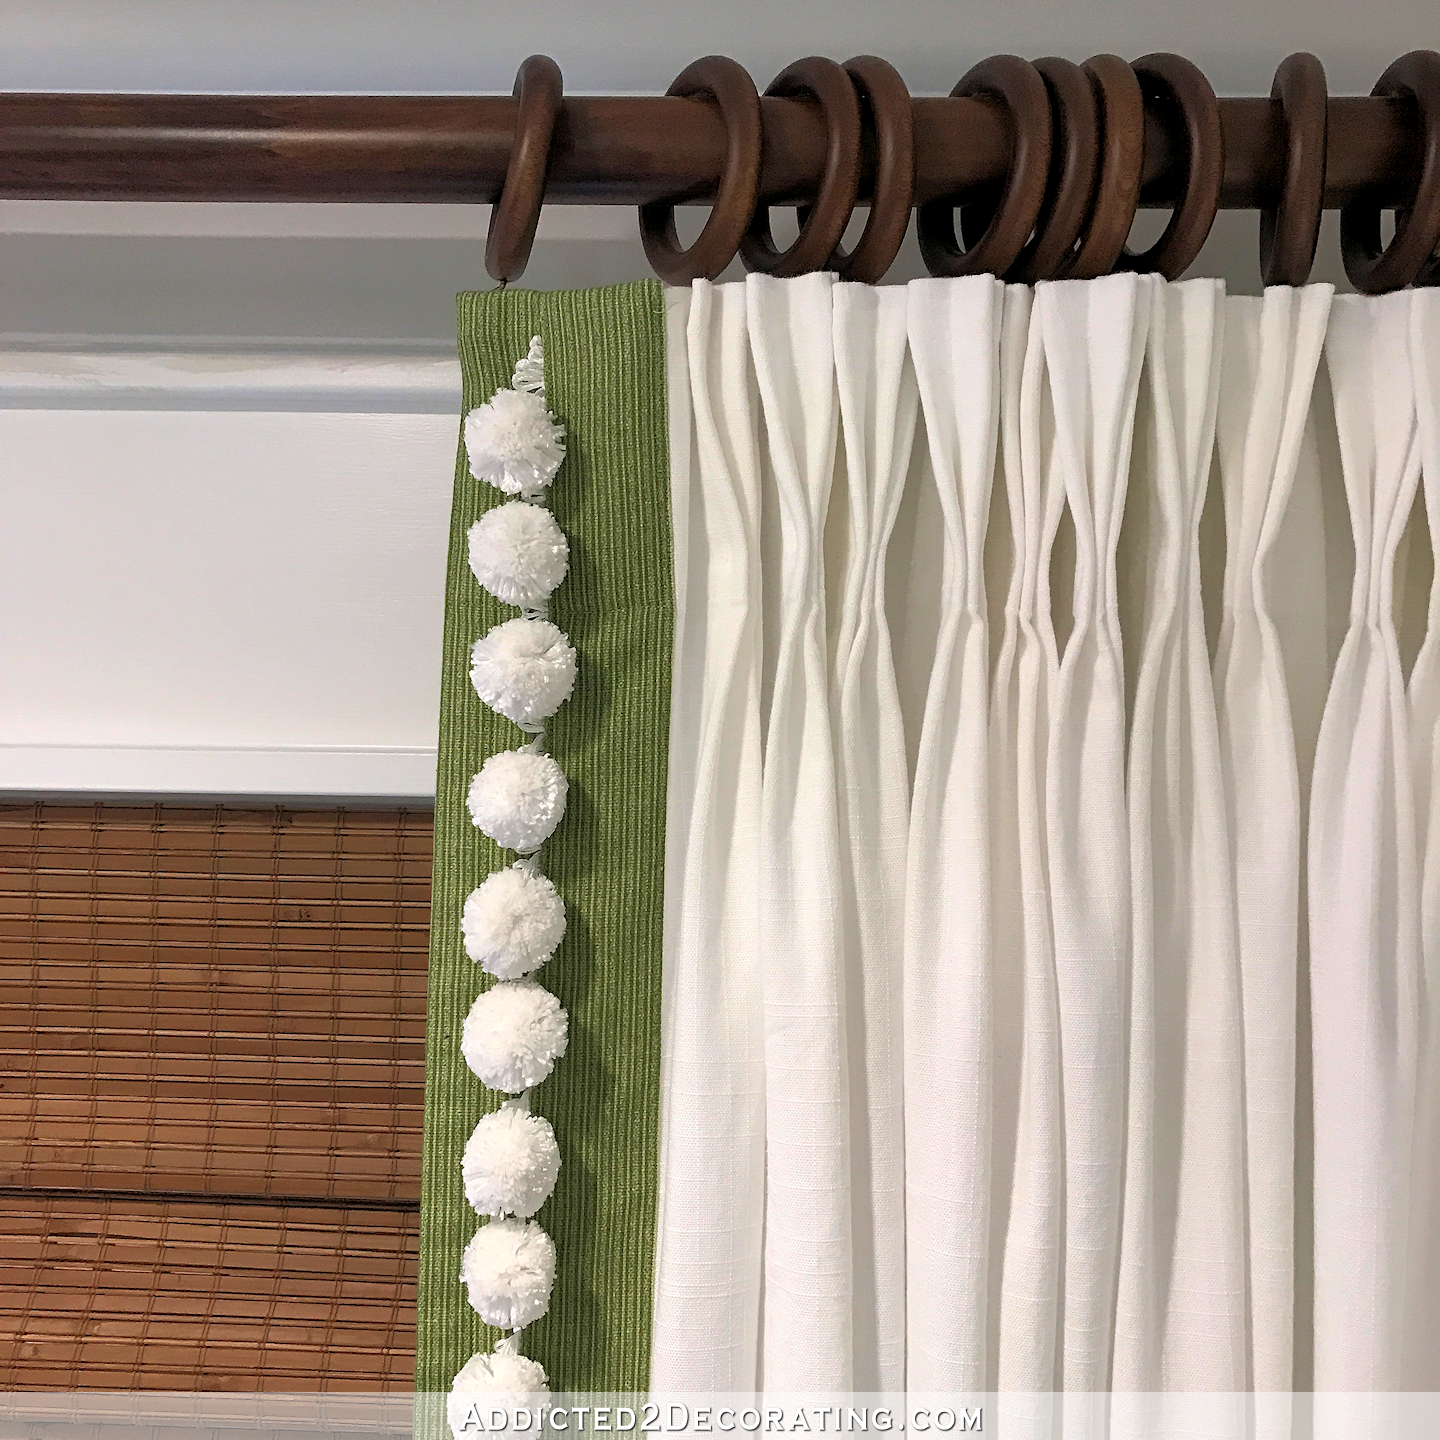 IKEA Ritva Curtains Customized With Contrast Edge Band, Pompom Trim and Pinch Pleats